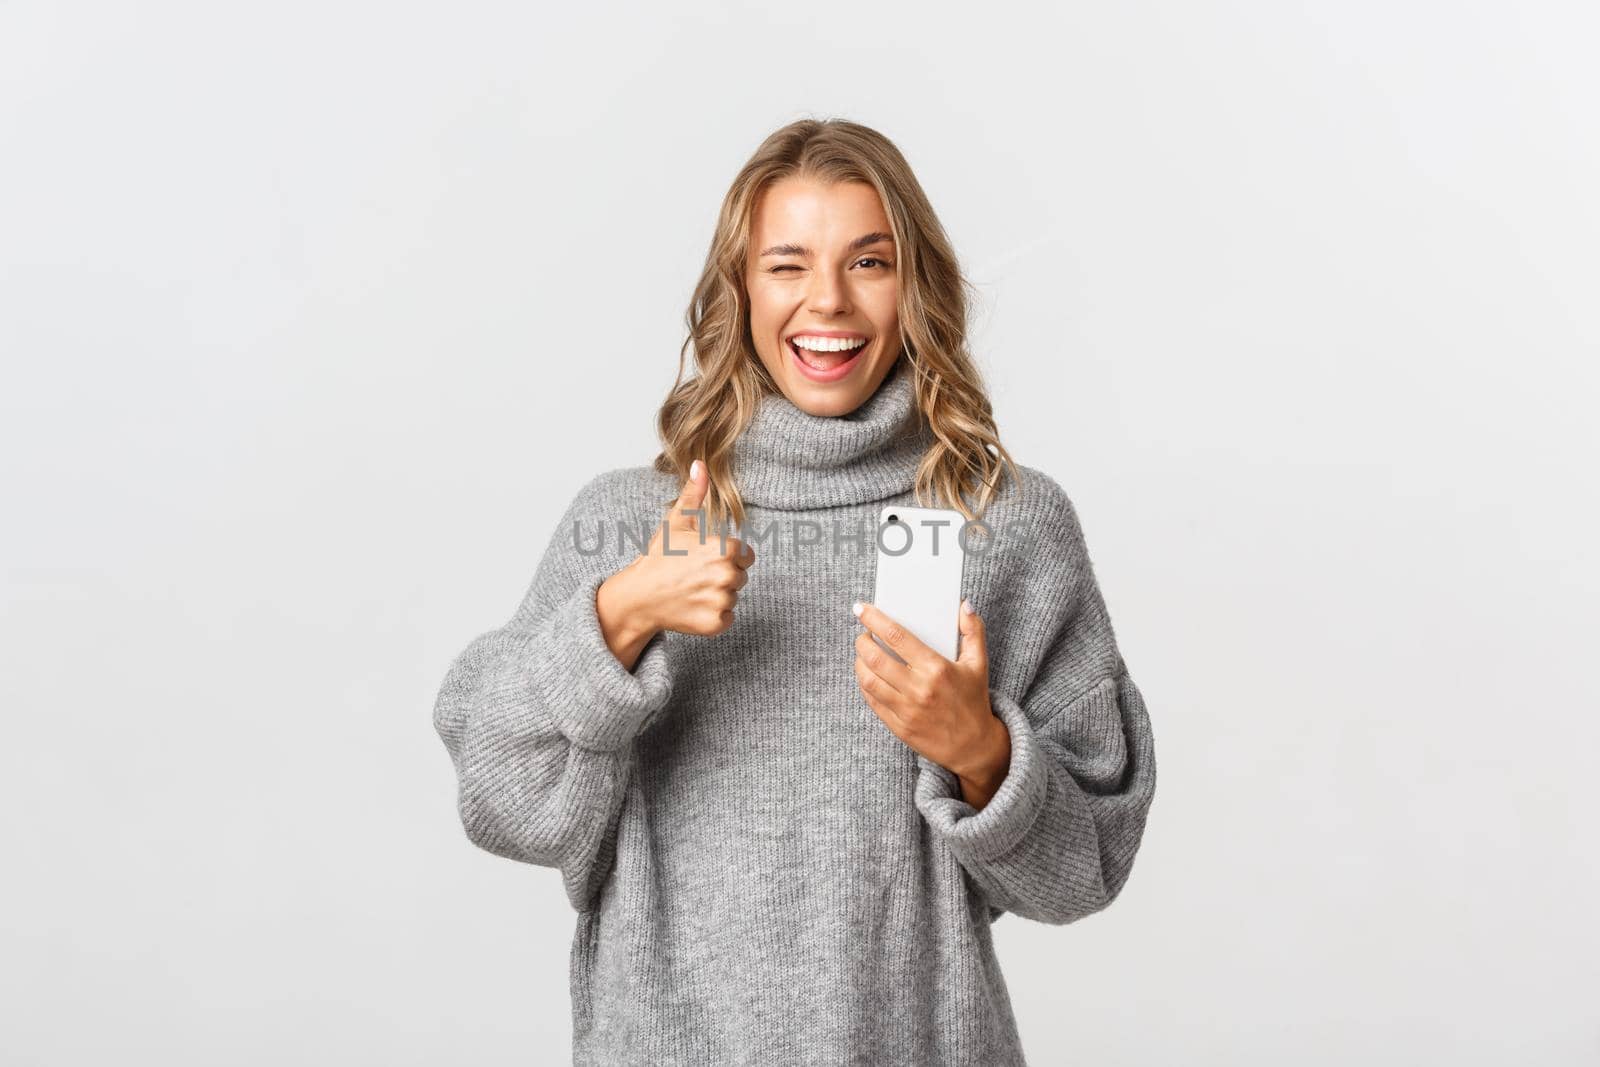 Portrait of attractive blond girl in grey sweater winking satisfied, showing thumbs-up and using mobile phone, recommend smartphone app, standing over white background.